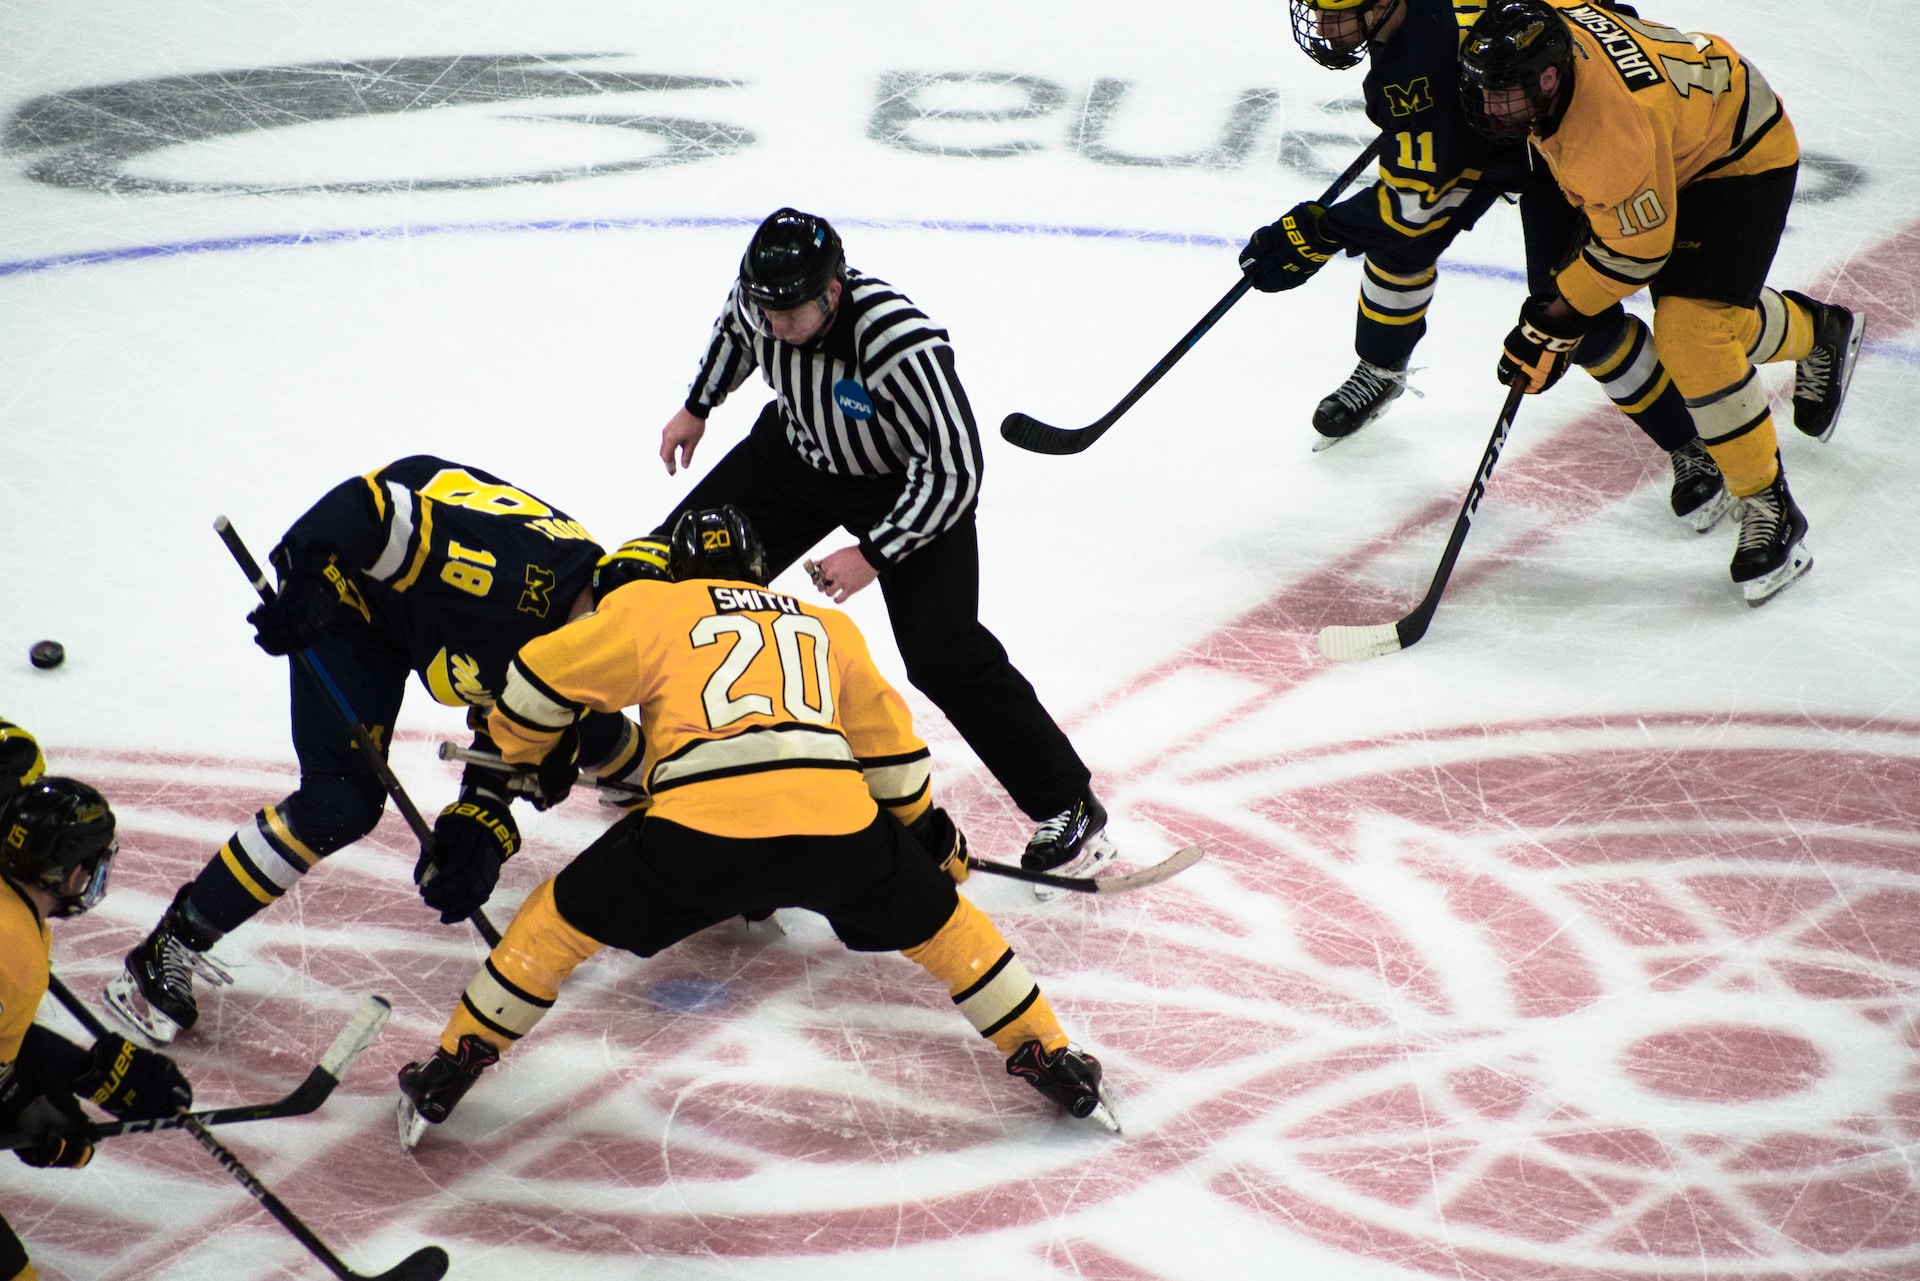 ice hockey players in yellow and black